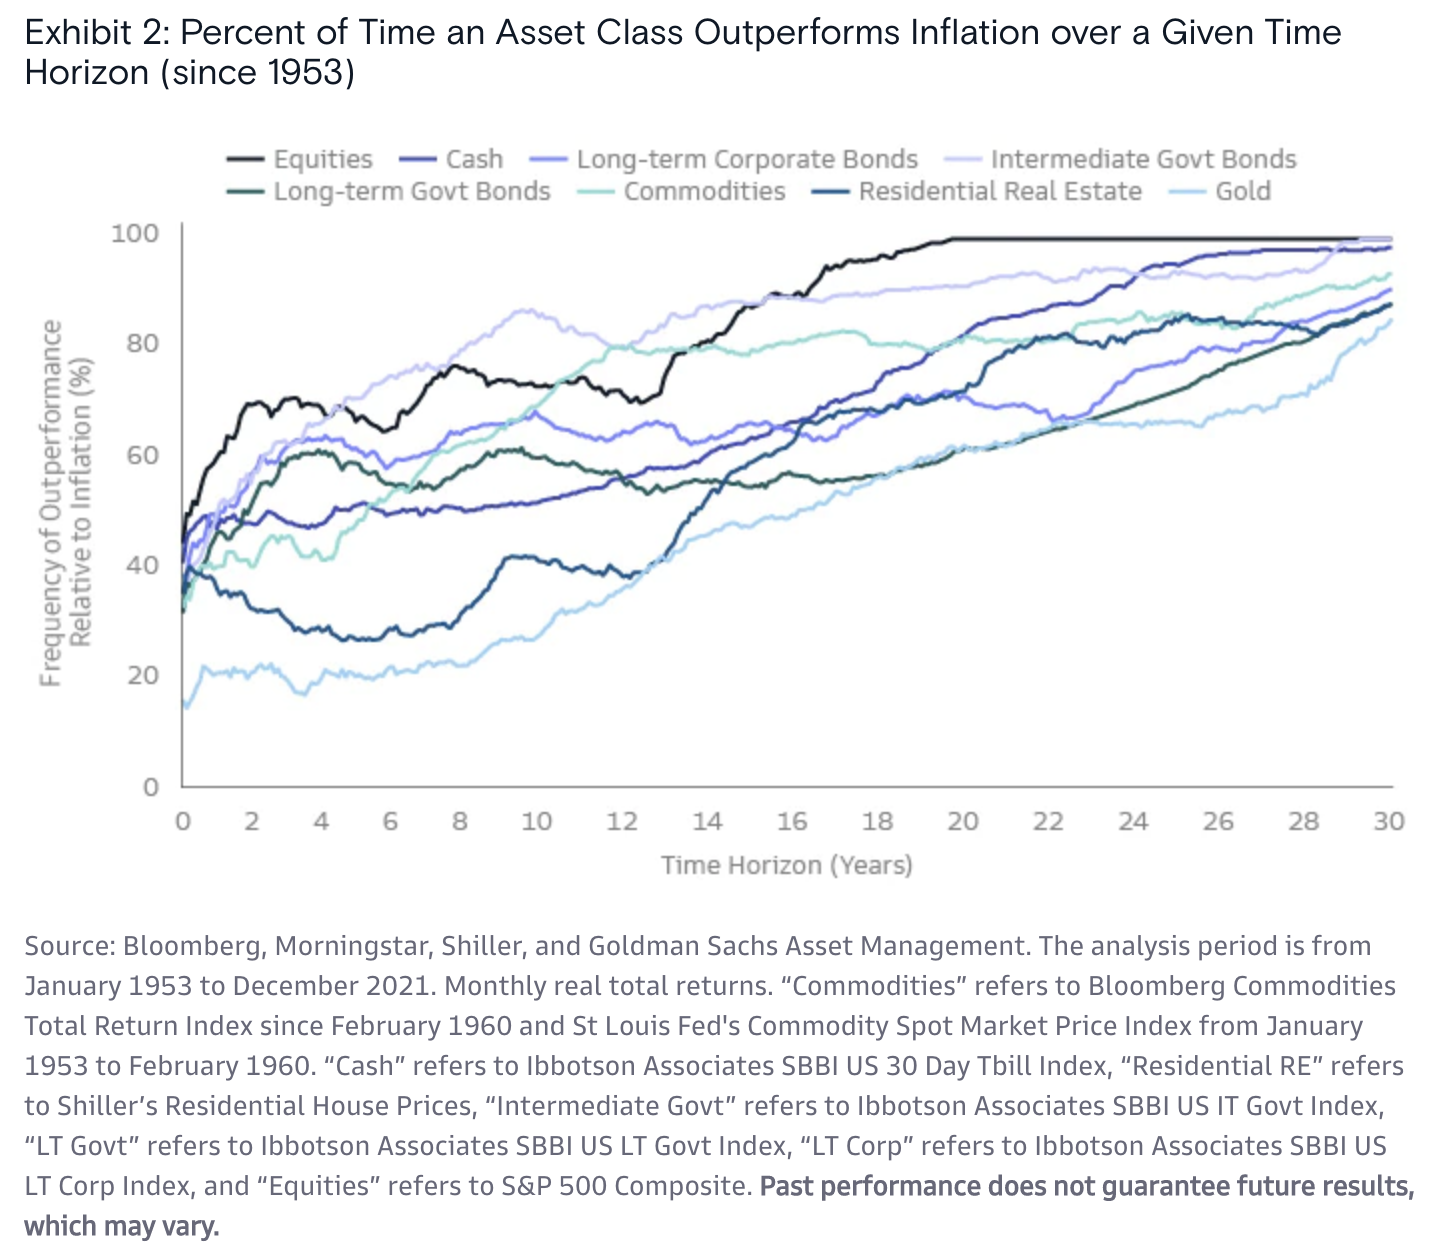 Check out the following graphic from Goldman Sachs Asset Management showing the percentage of time an asset class outperforms inflation over a given time horizon. 